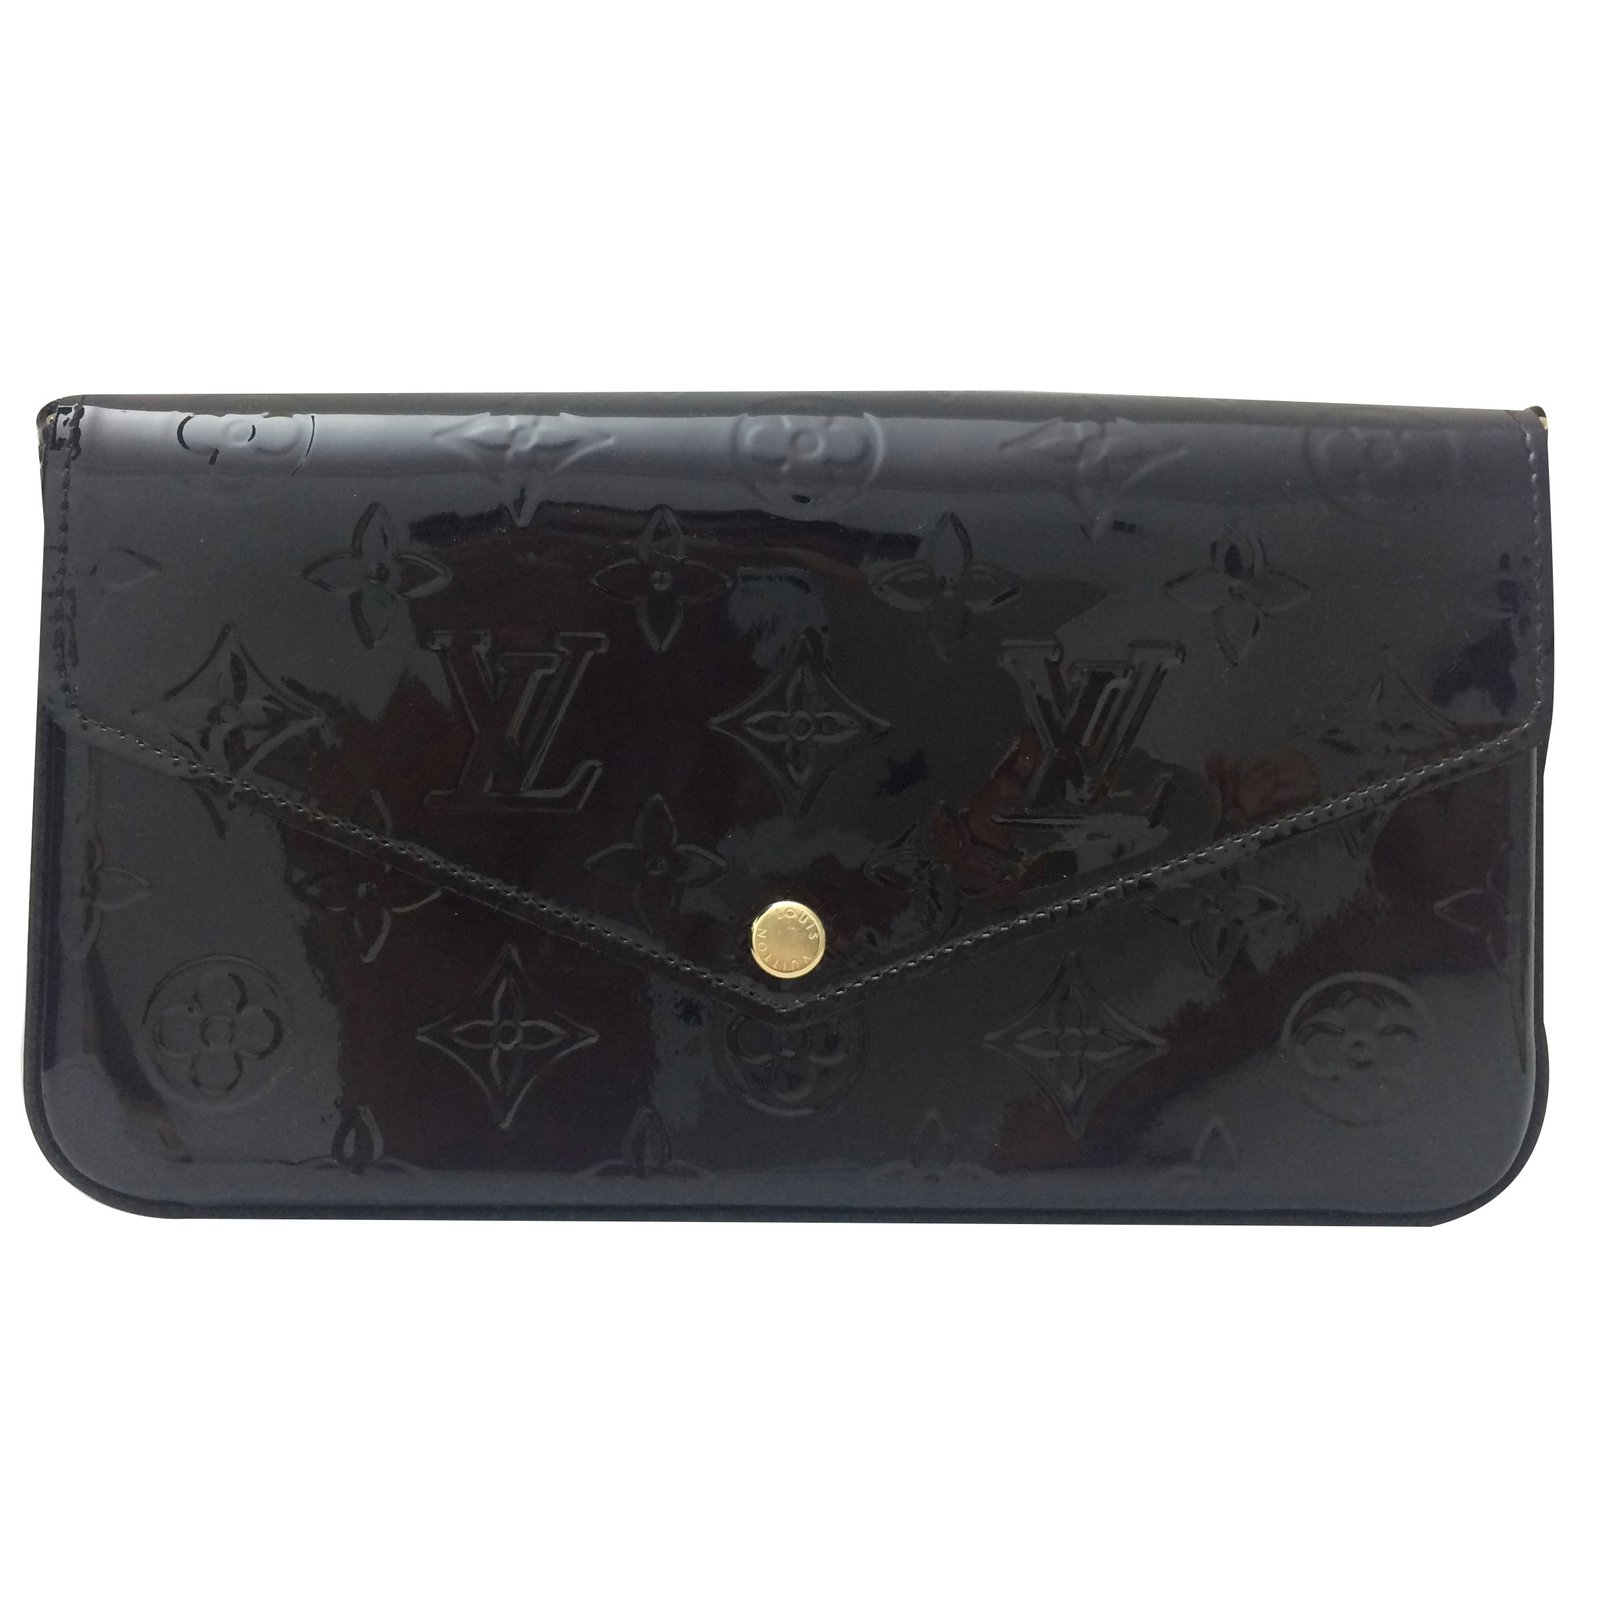 vuitton patent leather clutch